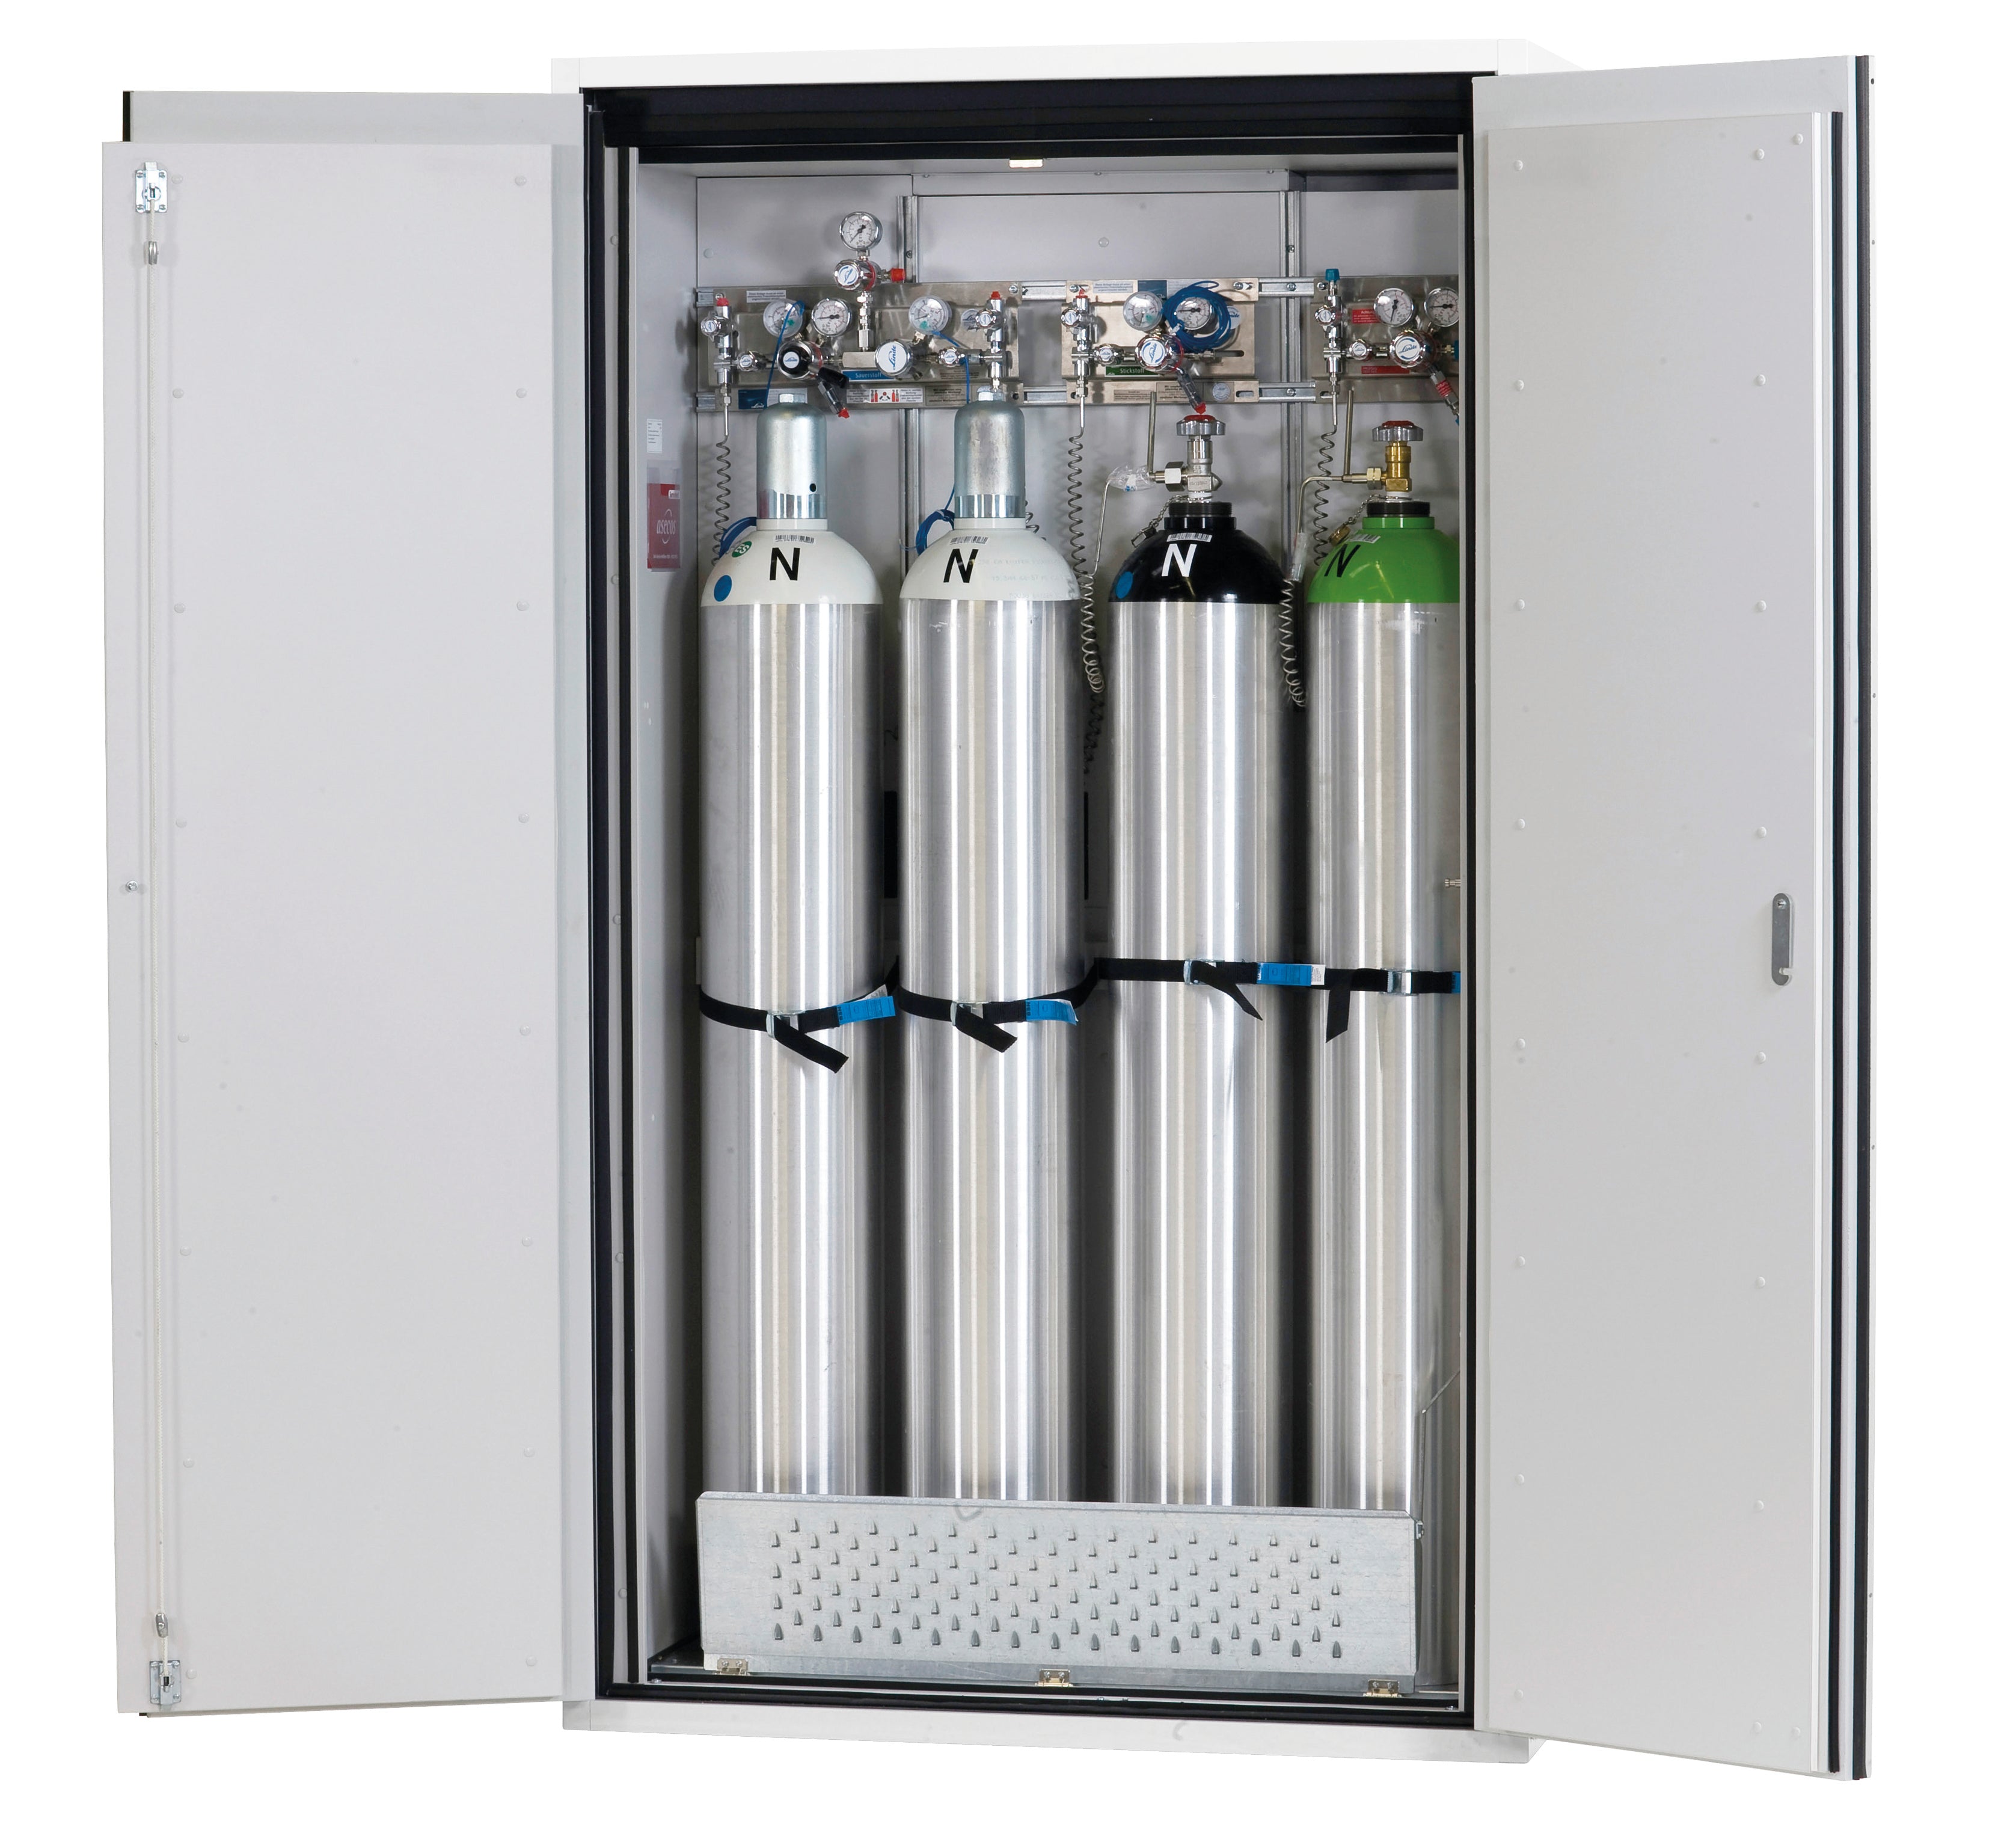 Type 90 compressed gas bottle cabinet G-ULTIMATE-90 model G90.205.120 in laboratory white (similar to RAL 9016) with comfortable interior fittings for 4x compressed gas bottles of 50 liters each